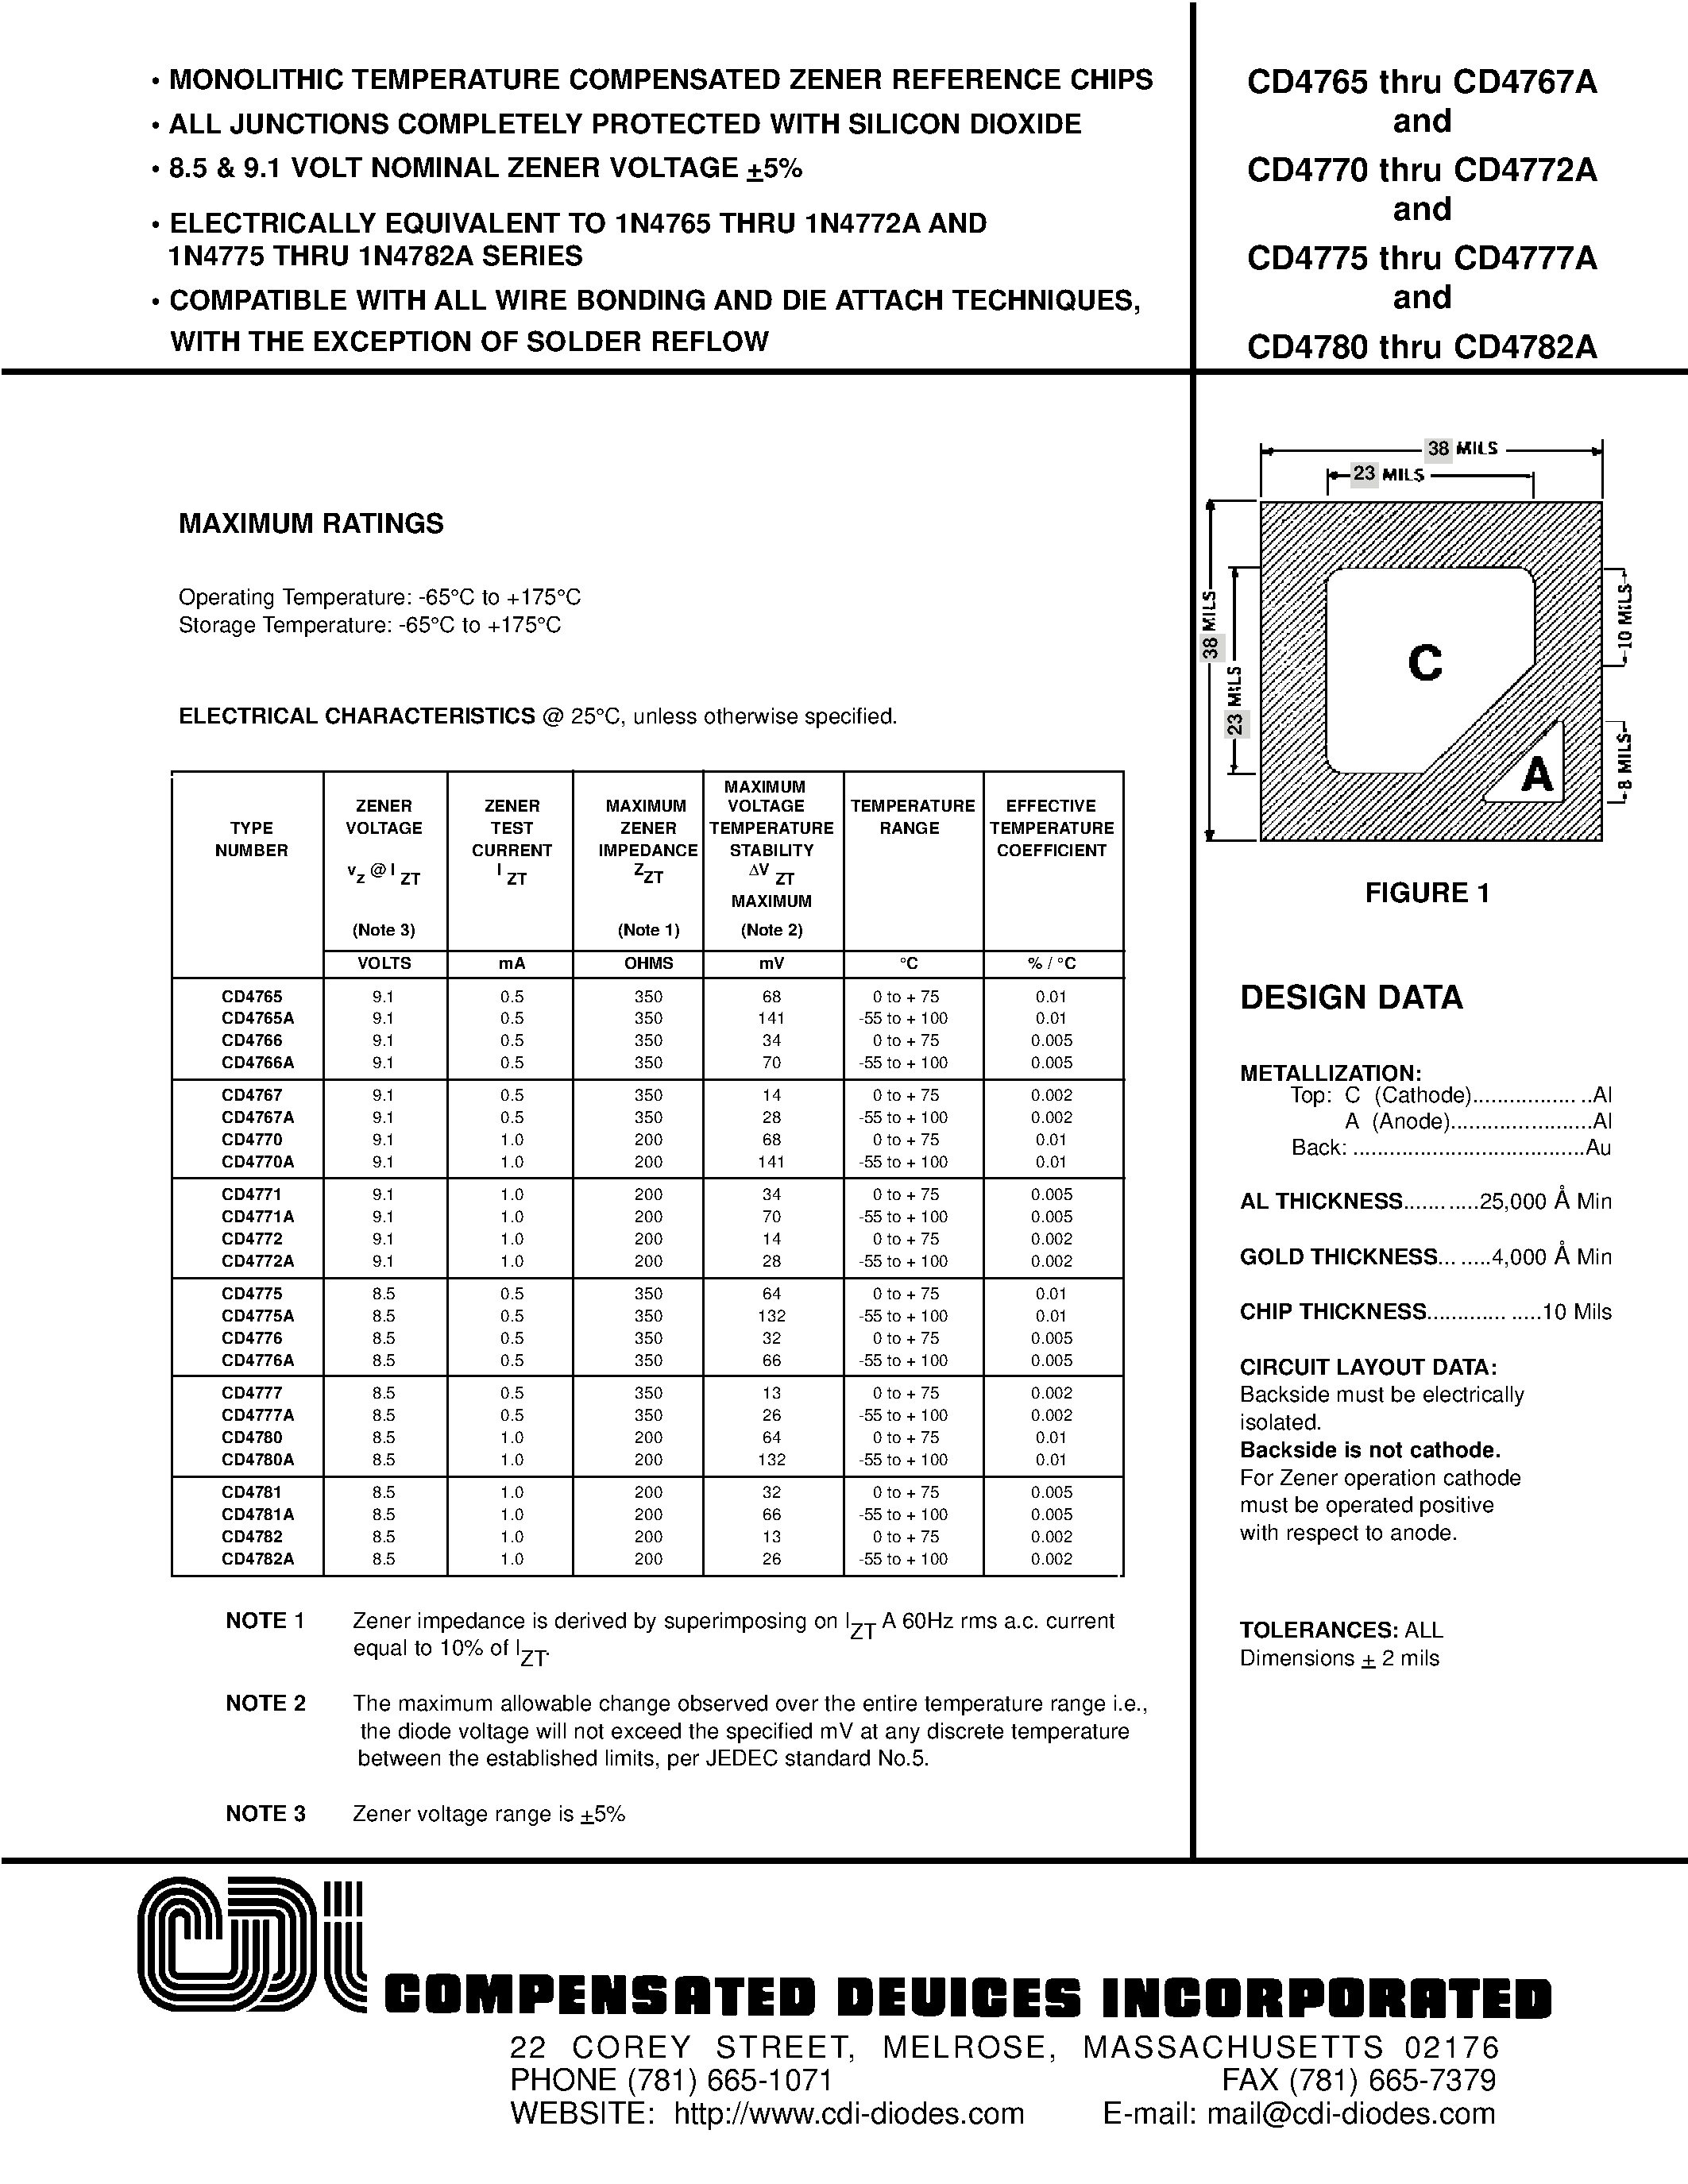 Datasheet CD4782 - MONOLITHIC TEMPERATURE COMPENSATED ZENER REFERENCE CHIPS page 1